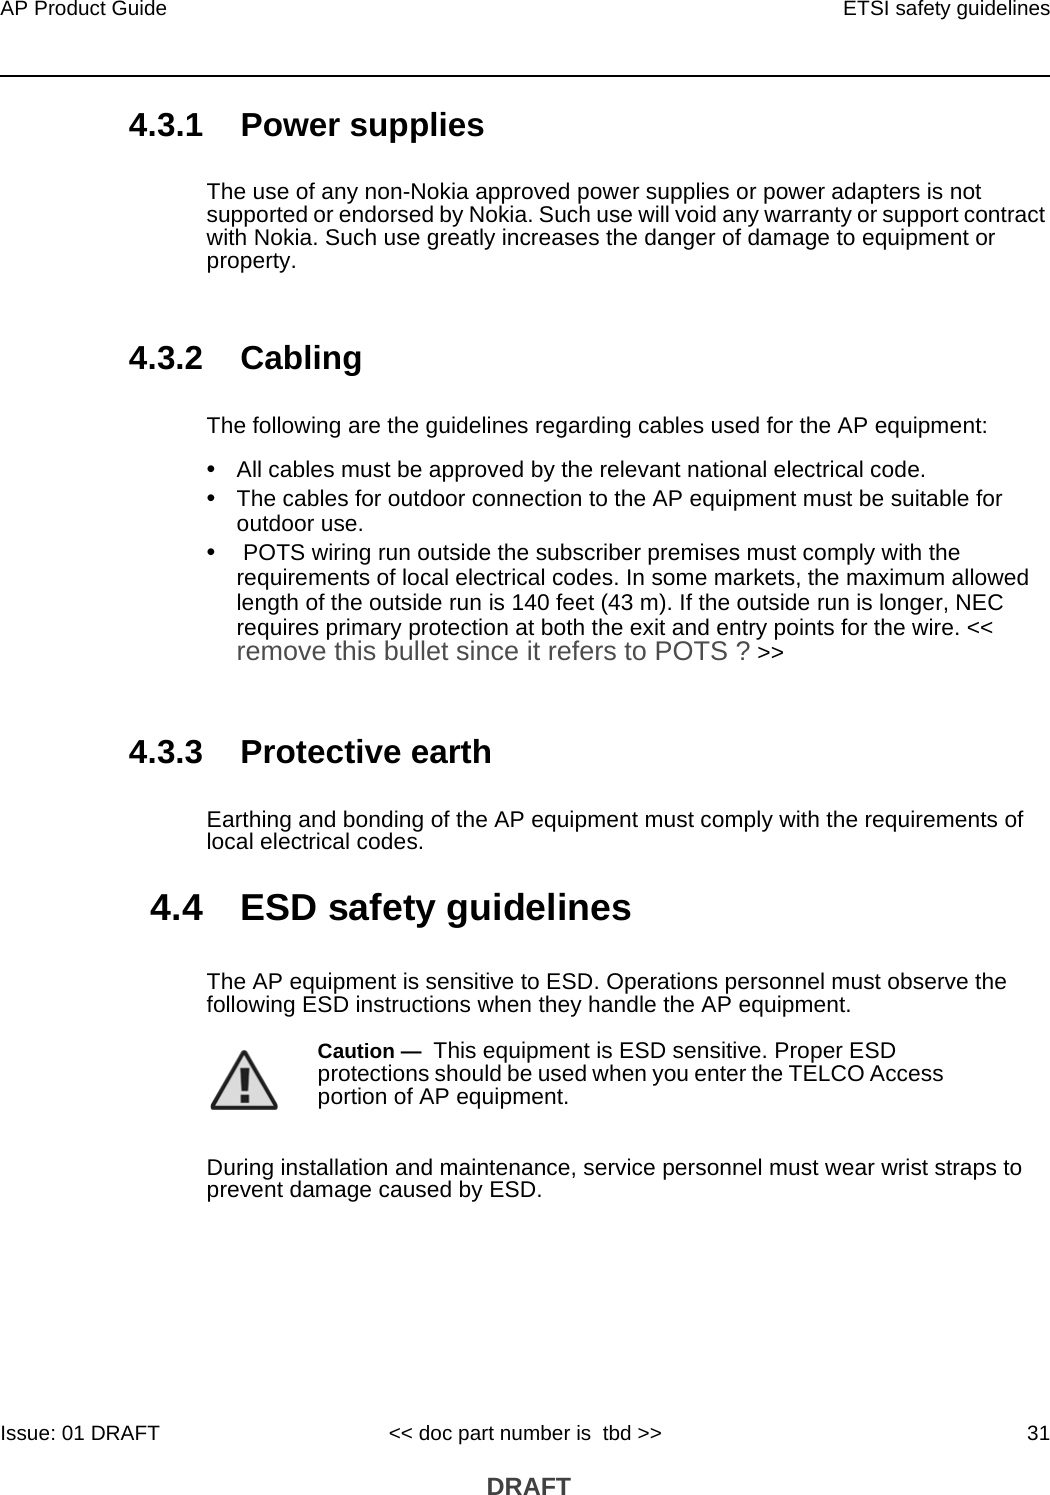 AP Product Guide ETSI safety guidelinesIssue: 01 DRAFT &lt;&lt; doc part number is  tbd &gt;&gt; 31 DRAFT4.3.1 Power suppliesThe use of any non-Nokia approved power supplies or power adapters is not supported or endorsed by Nokia. Such use will void any warranty or support contract with Nokia. Such use greatly increases the danger of damage to equipment or property.4.3.2 CablingThe following are the guidelines regarding cables used for the AP equipment:•All cables must be approved by the relevant national electrical code.•The cables for outdoor connection to the AP equipment must be suitable for outdoor use.• POTS wiring run outside the subscriber premises must comply with the requirements of local electrical codes. In some markets, the maximum allowed length of the outside run is 140 feet (43 m). If the outside run is longer, NEC requires primary protection at both the exit and entry points for the wire. &lt;&lt; remove this bullet since it refers to POTS ? &gt;&gt;4.3.3 Protective earthEarthing and bonding of the AP equipment must comply with the requirements of local electrical codes.4.4 ESD safety guidelinesThe AP equipment is sensitive to ESD. Operations personnel must observe the following ESD instructions when they handle the AP equipment. During installation and maintenance, service personnel must wear wrist straps to prevent damage caused by ESD.Caution —  This equipment is ESD sensitive. Proper ESD protections should be used when you enter the TELCO Access portion of AP equipment.